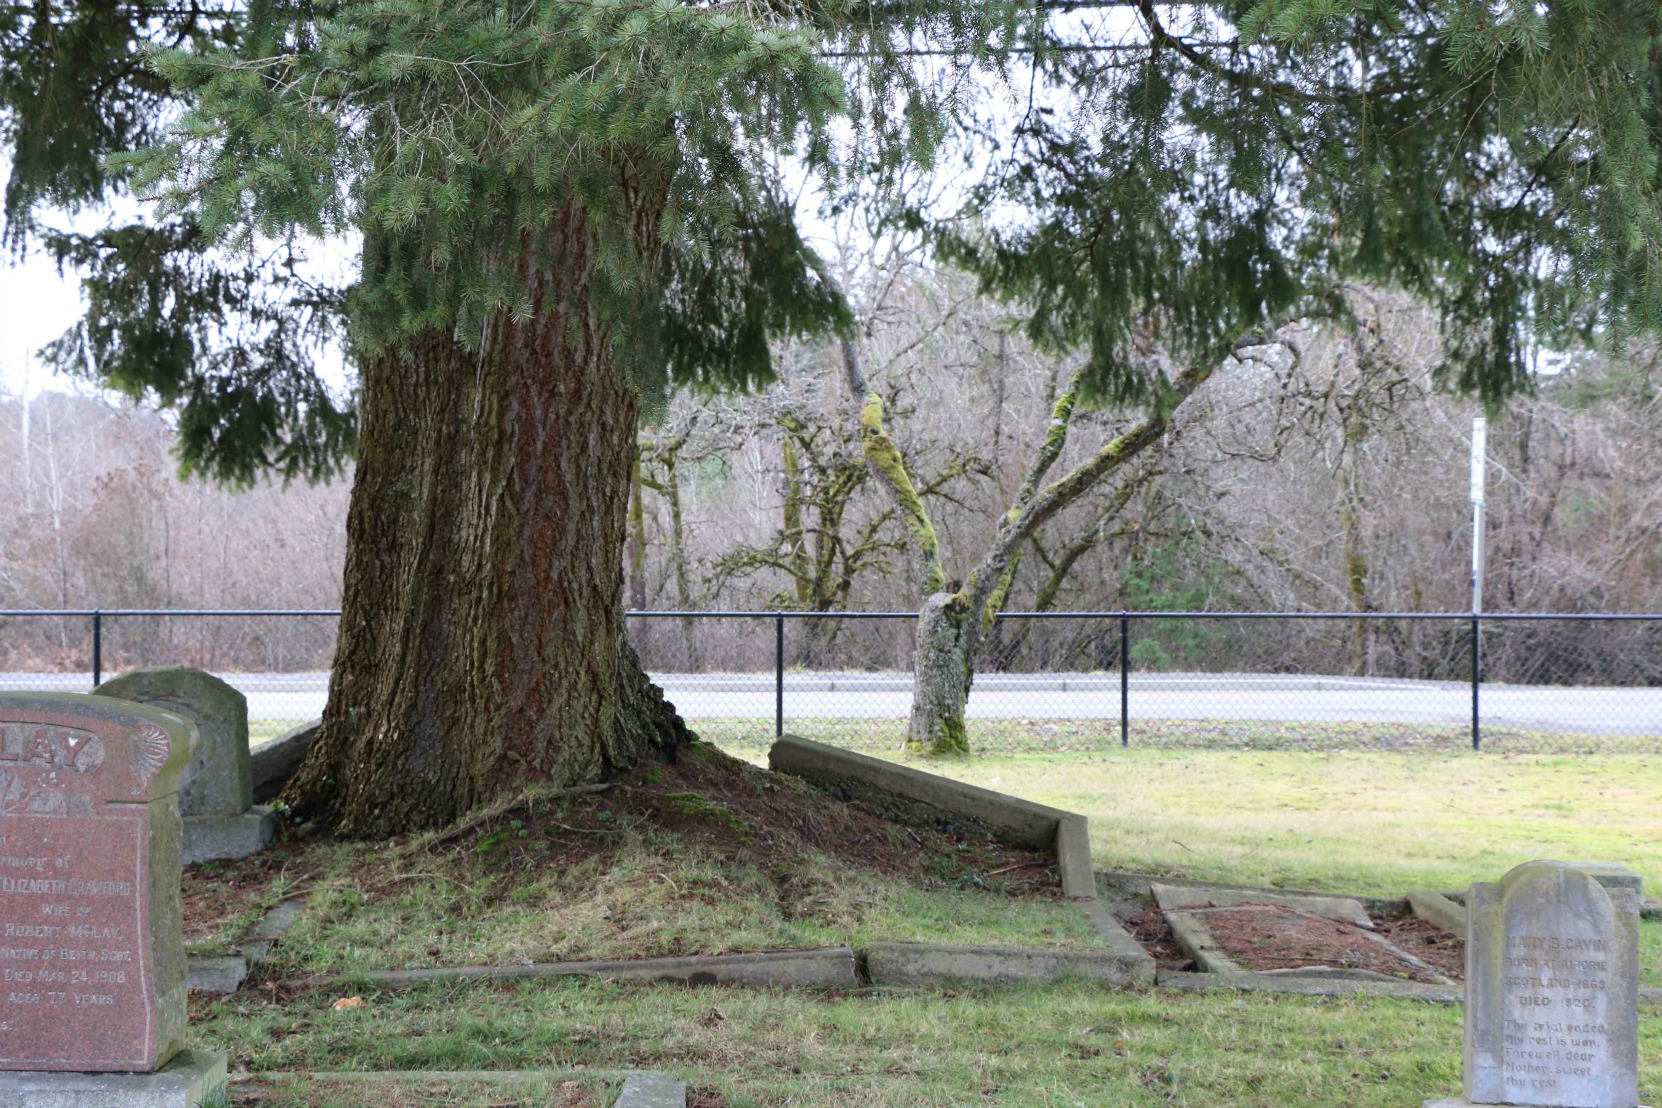 The grave of Thomas Van Norman and his wife in Mountain View Cemetery, North Cowichan. A large tree is growing in the Van Norman grave and has raised the concrete border around the grave. (photo by Temple Lodge No. 33 Historian)